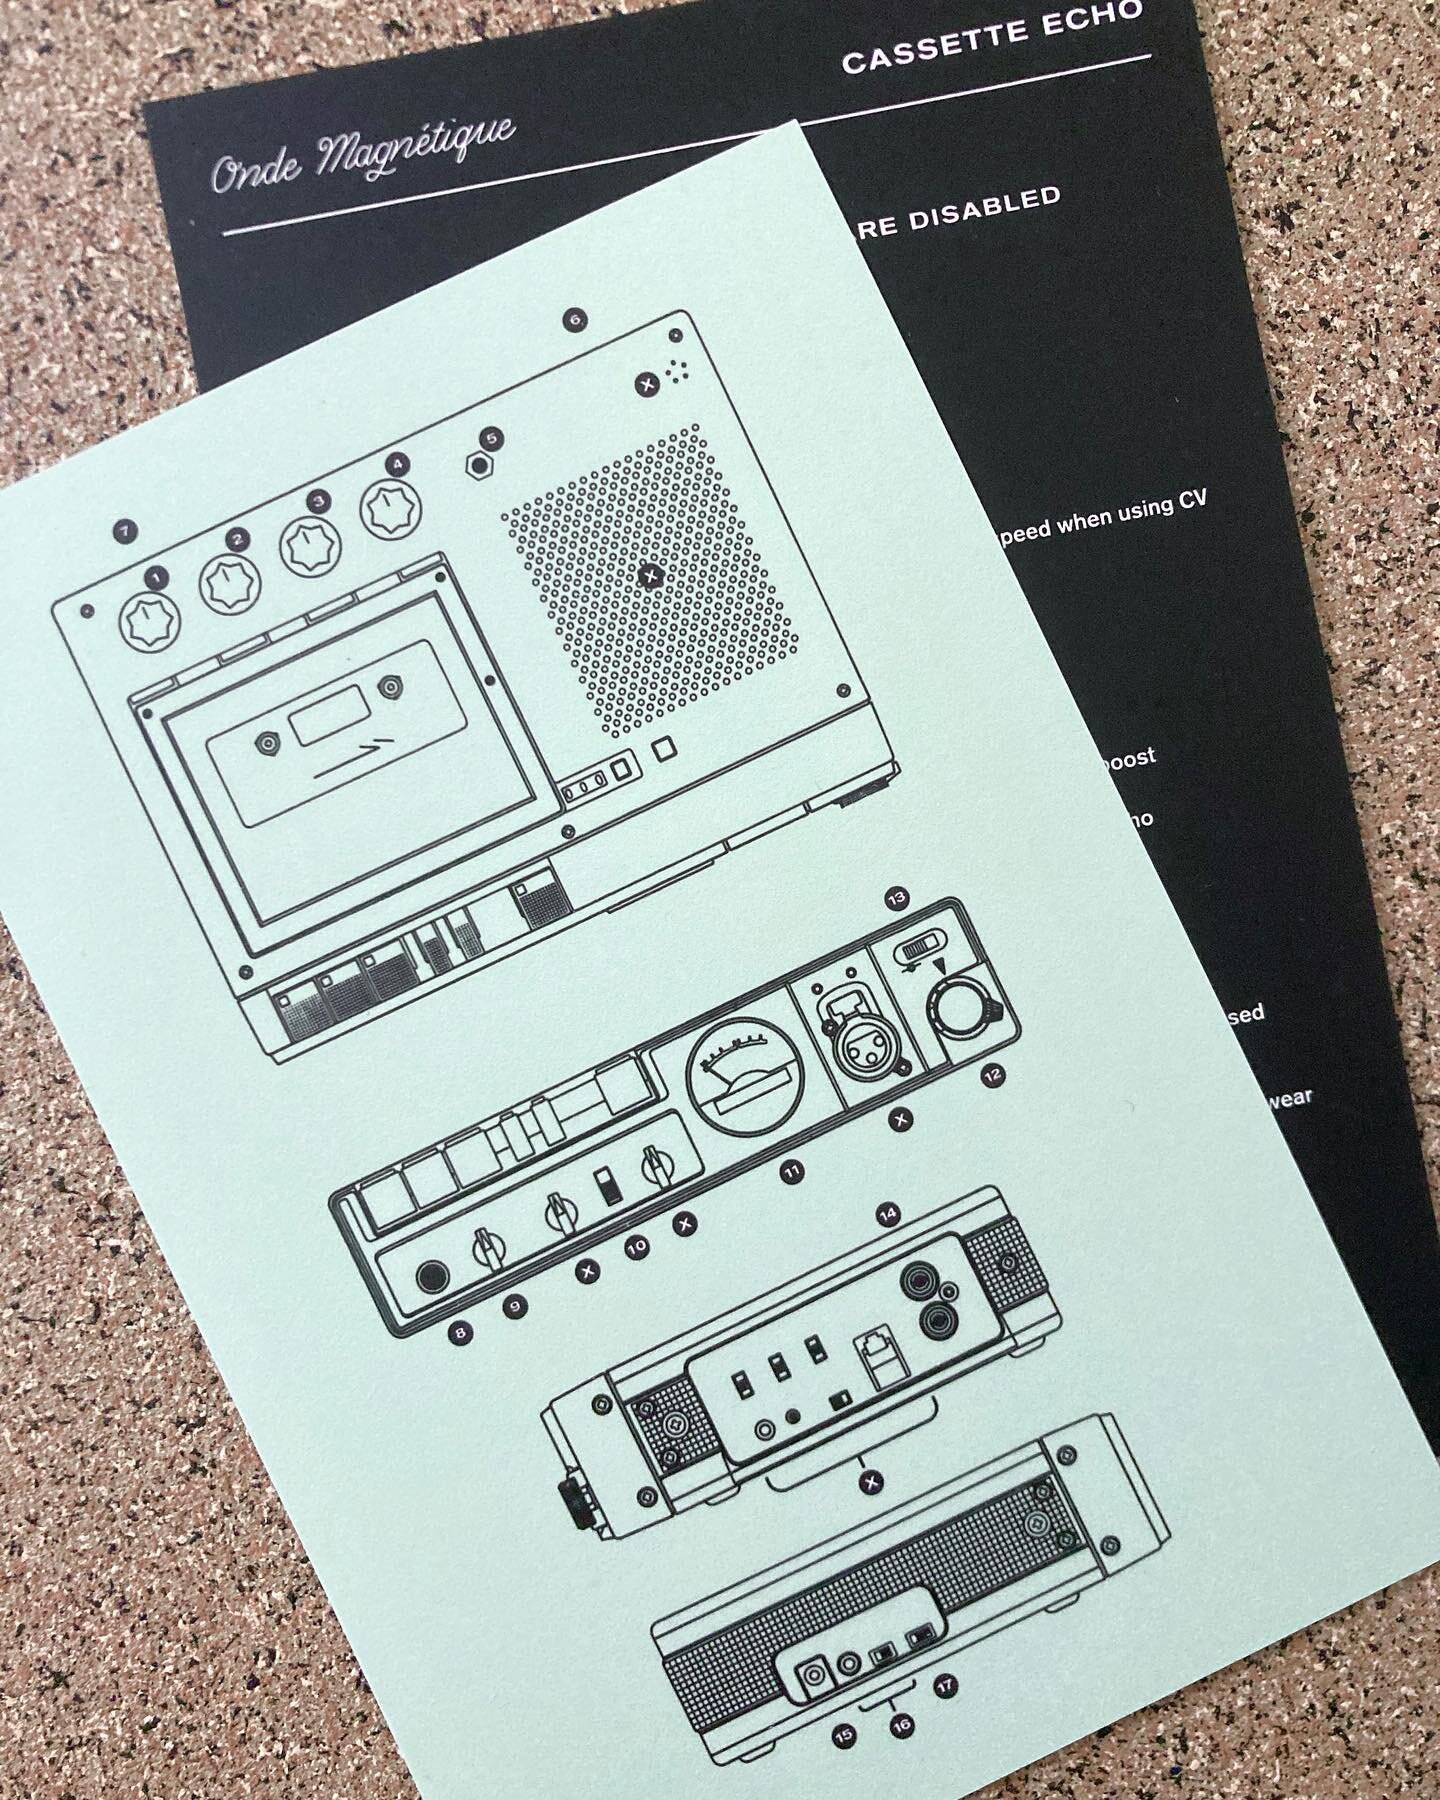 Tiny manual for the Cassette Echo.
#ondemagnetique #cassette #echo #tapeecho #tapedelay